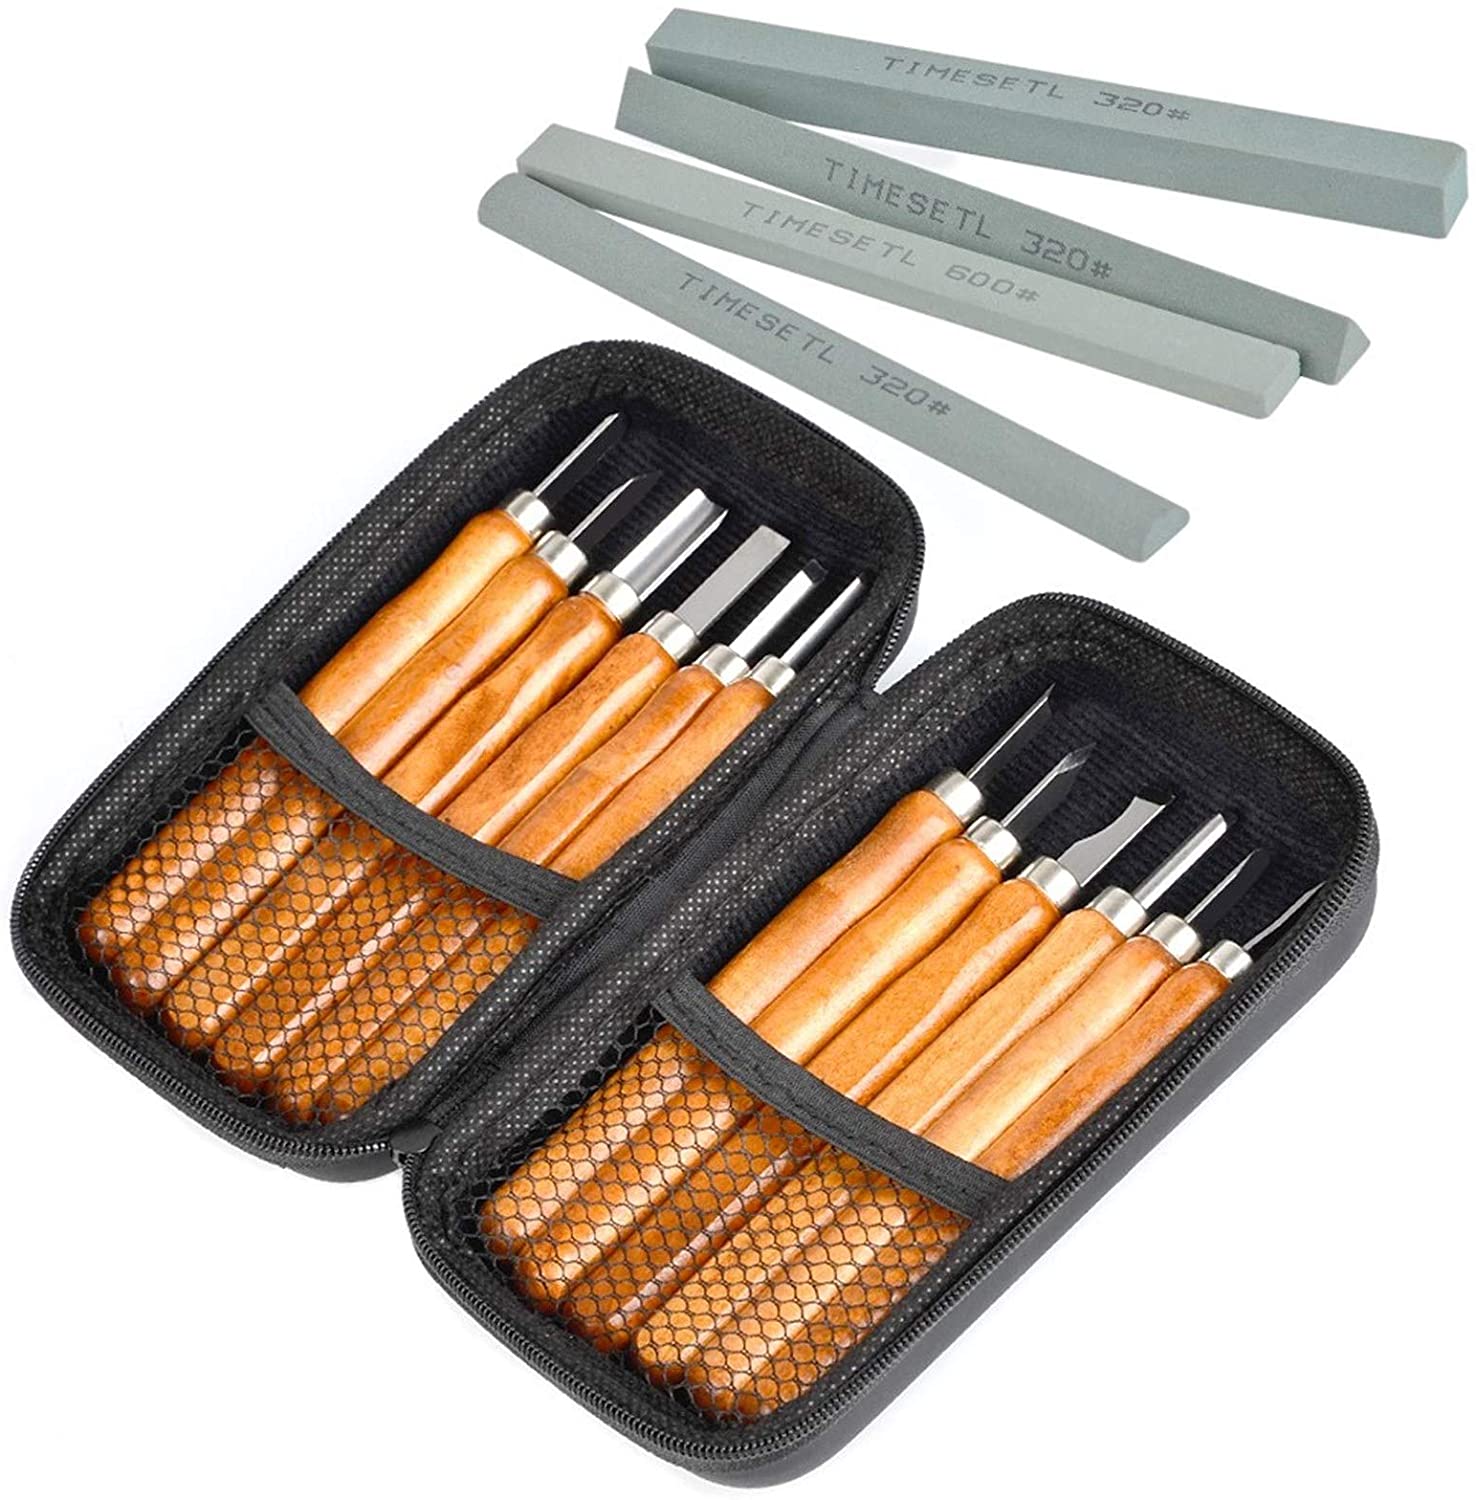 TIMESETL Small Wood Carving Set